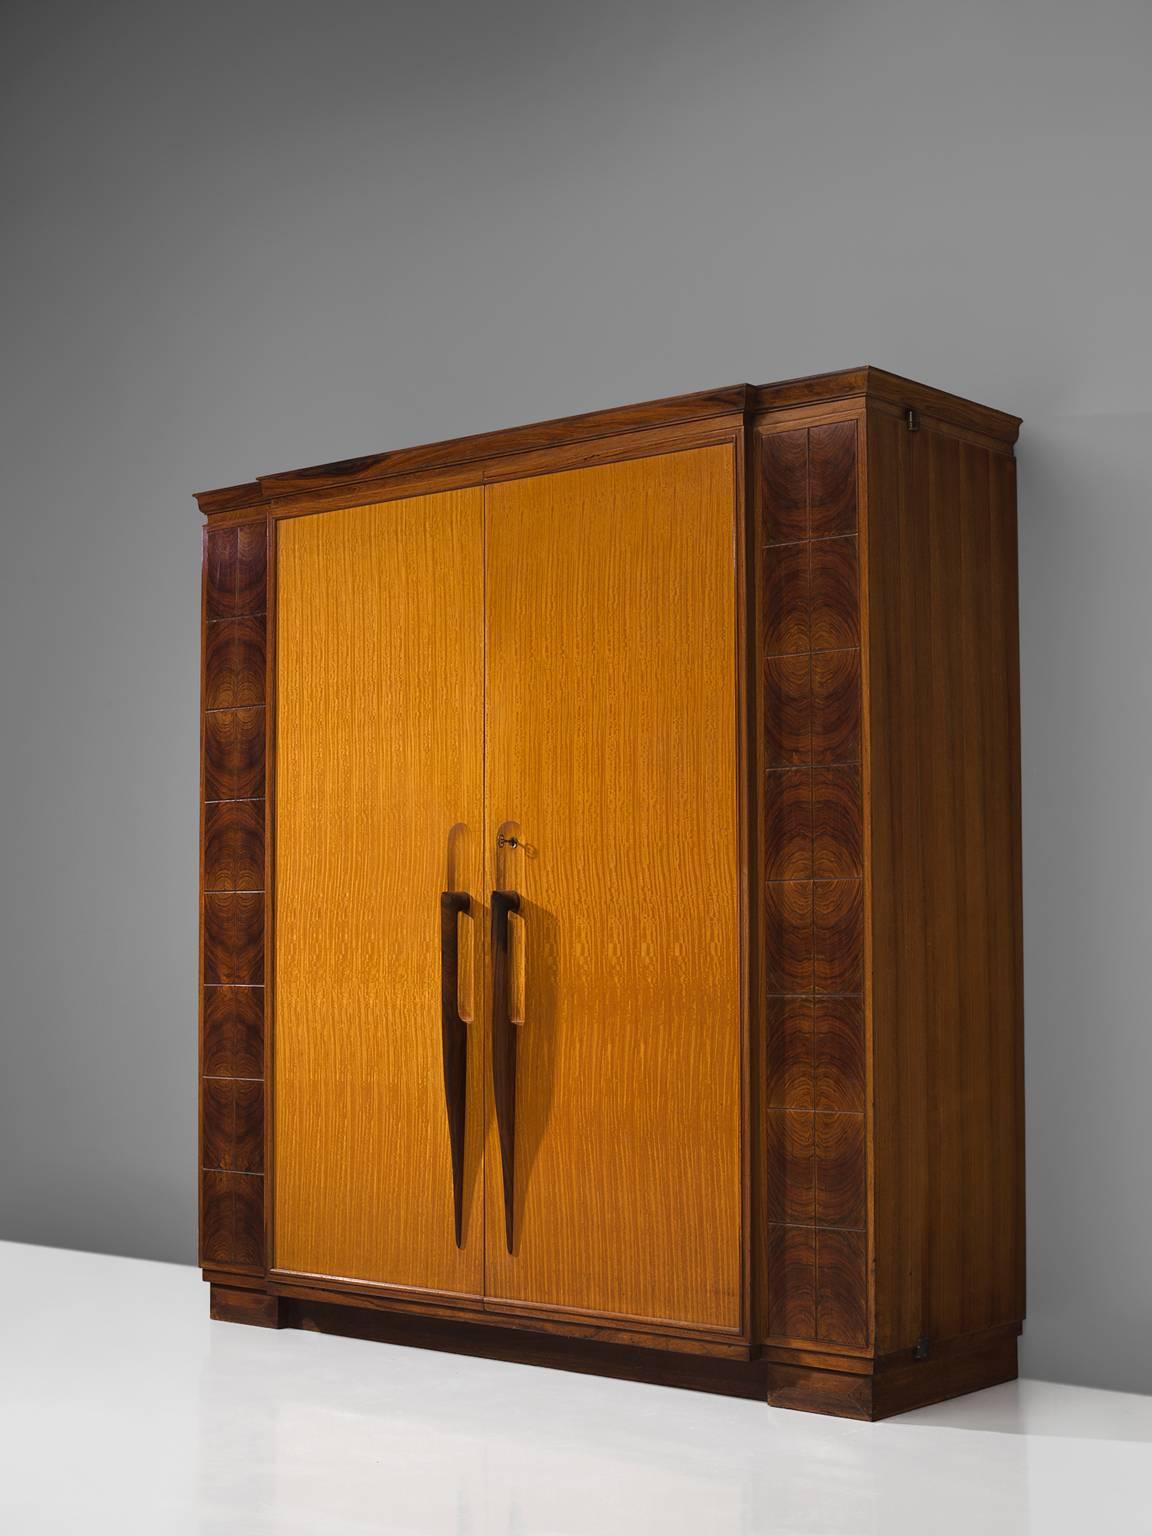 Cabinet, mahogany, satinwood, Italy, 1930s. 

This early Italian cabinet stands out due to its finesse and refinement. The cabinet has may hand-carved exquisite details such as the handles that are carved as a sharp, long drop. The front of the